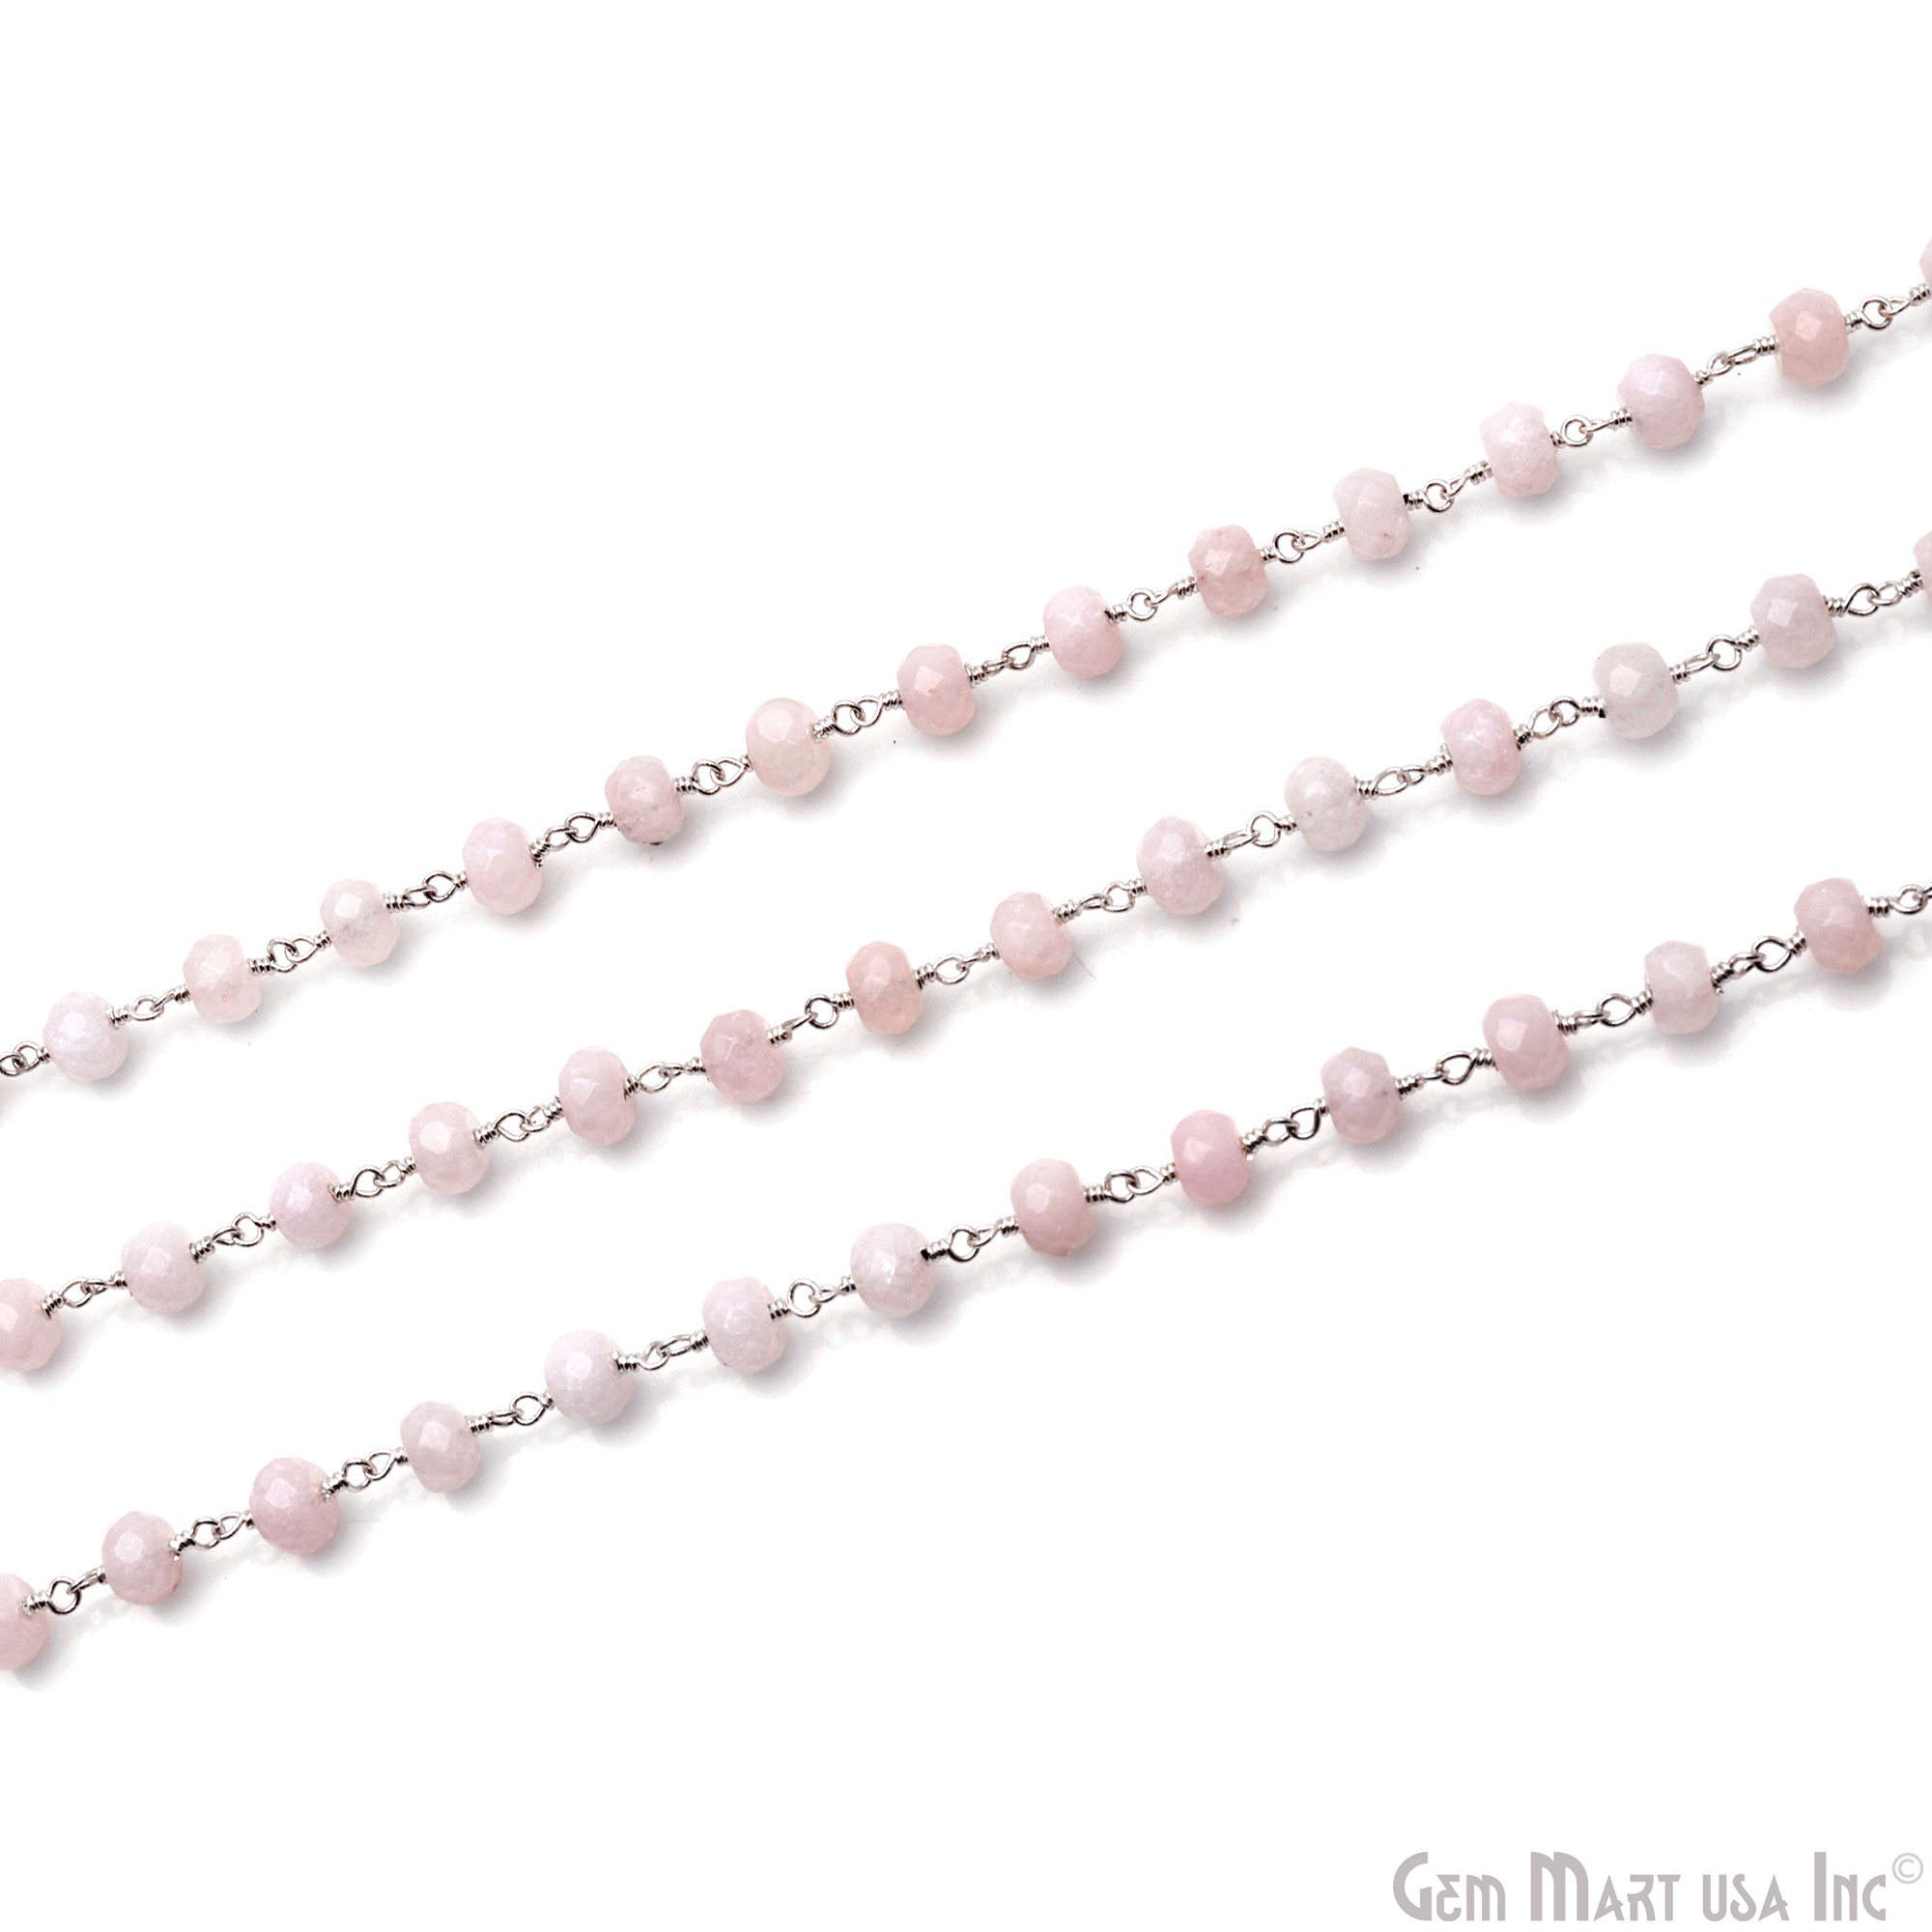 Light Pink Jade Faceted 5-6mm Silver Wire Wrapped Beads Rosary Chain